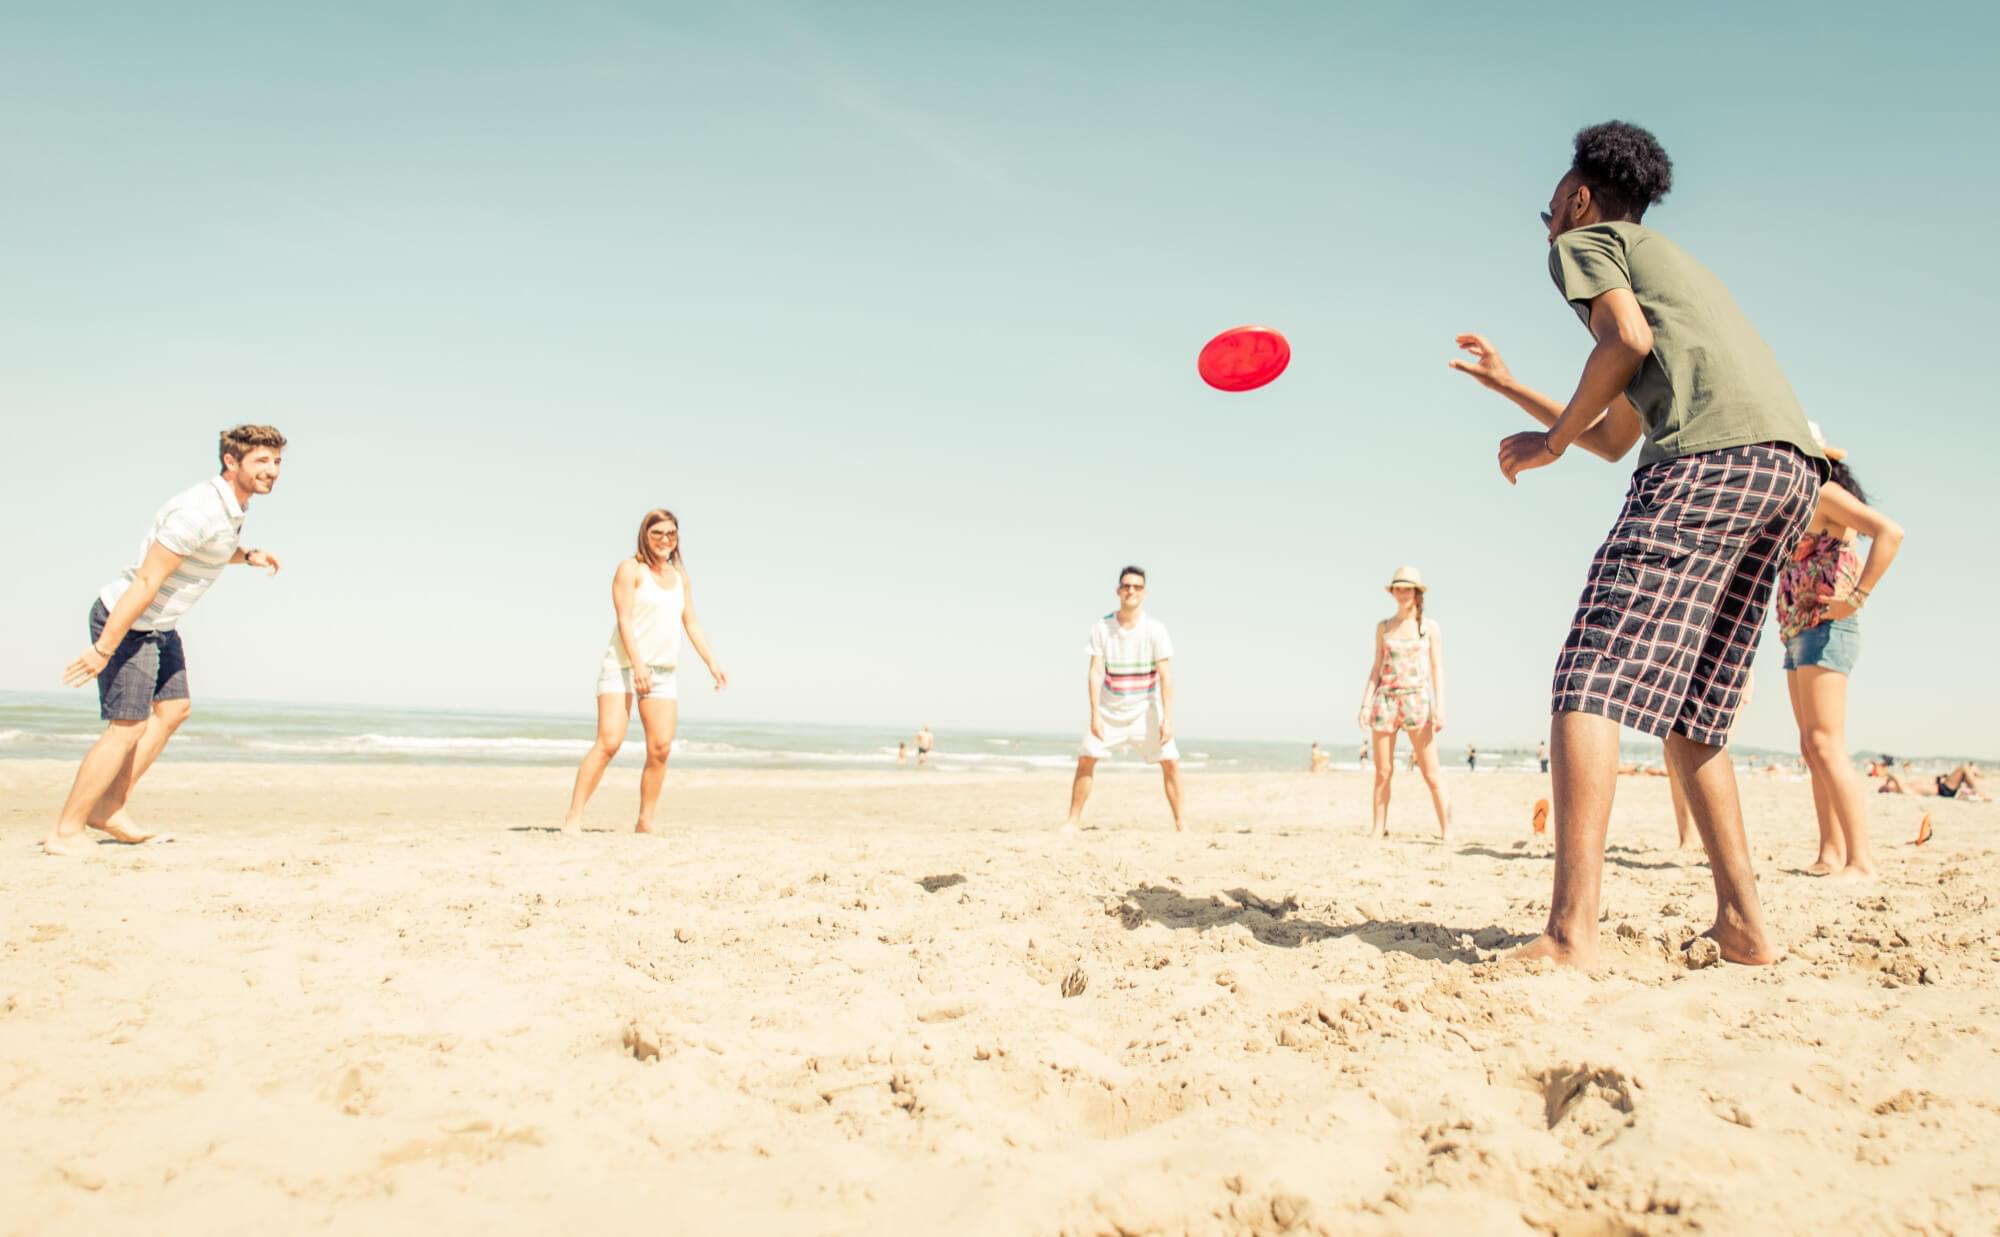 30 Fun Activities to Do at the Beach to Make Vacation Fantastic